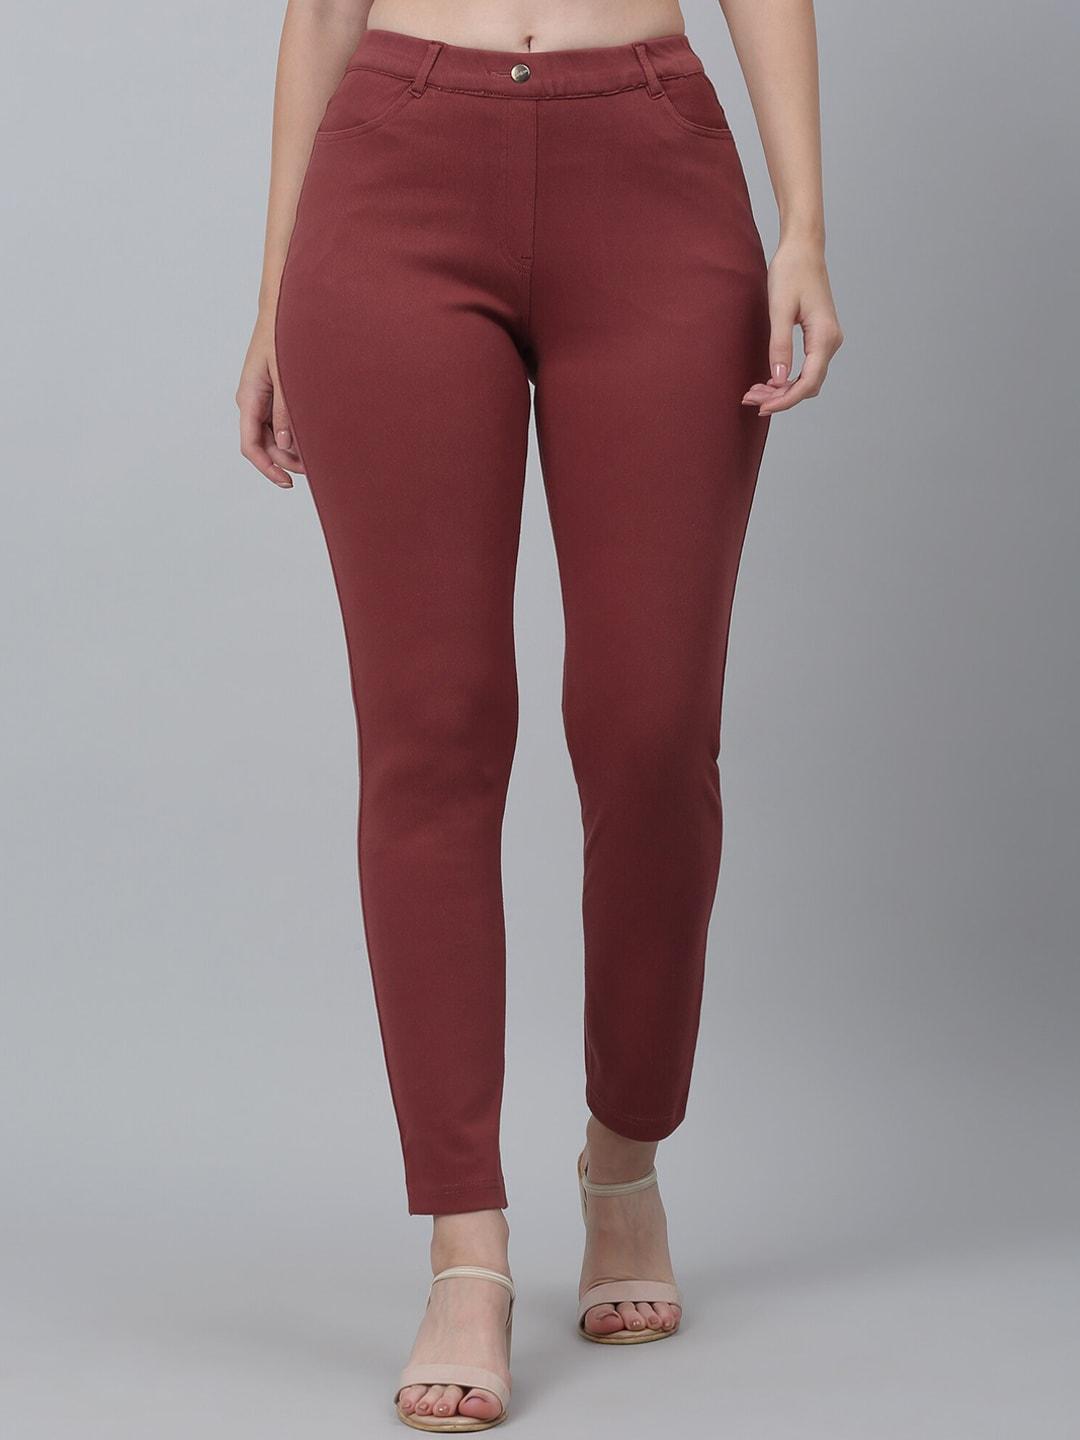 cantabil-cotton-mid-rise-jeggings